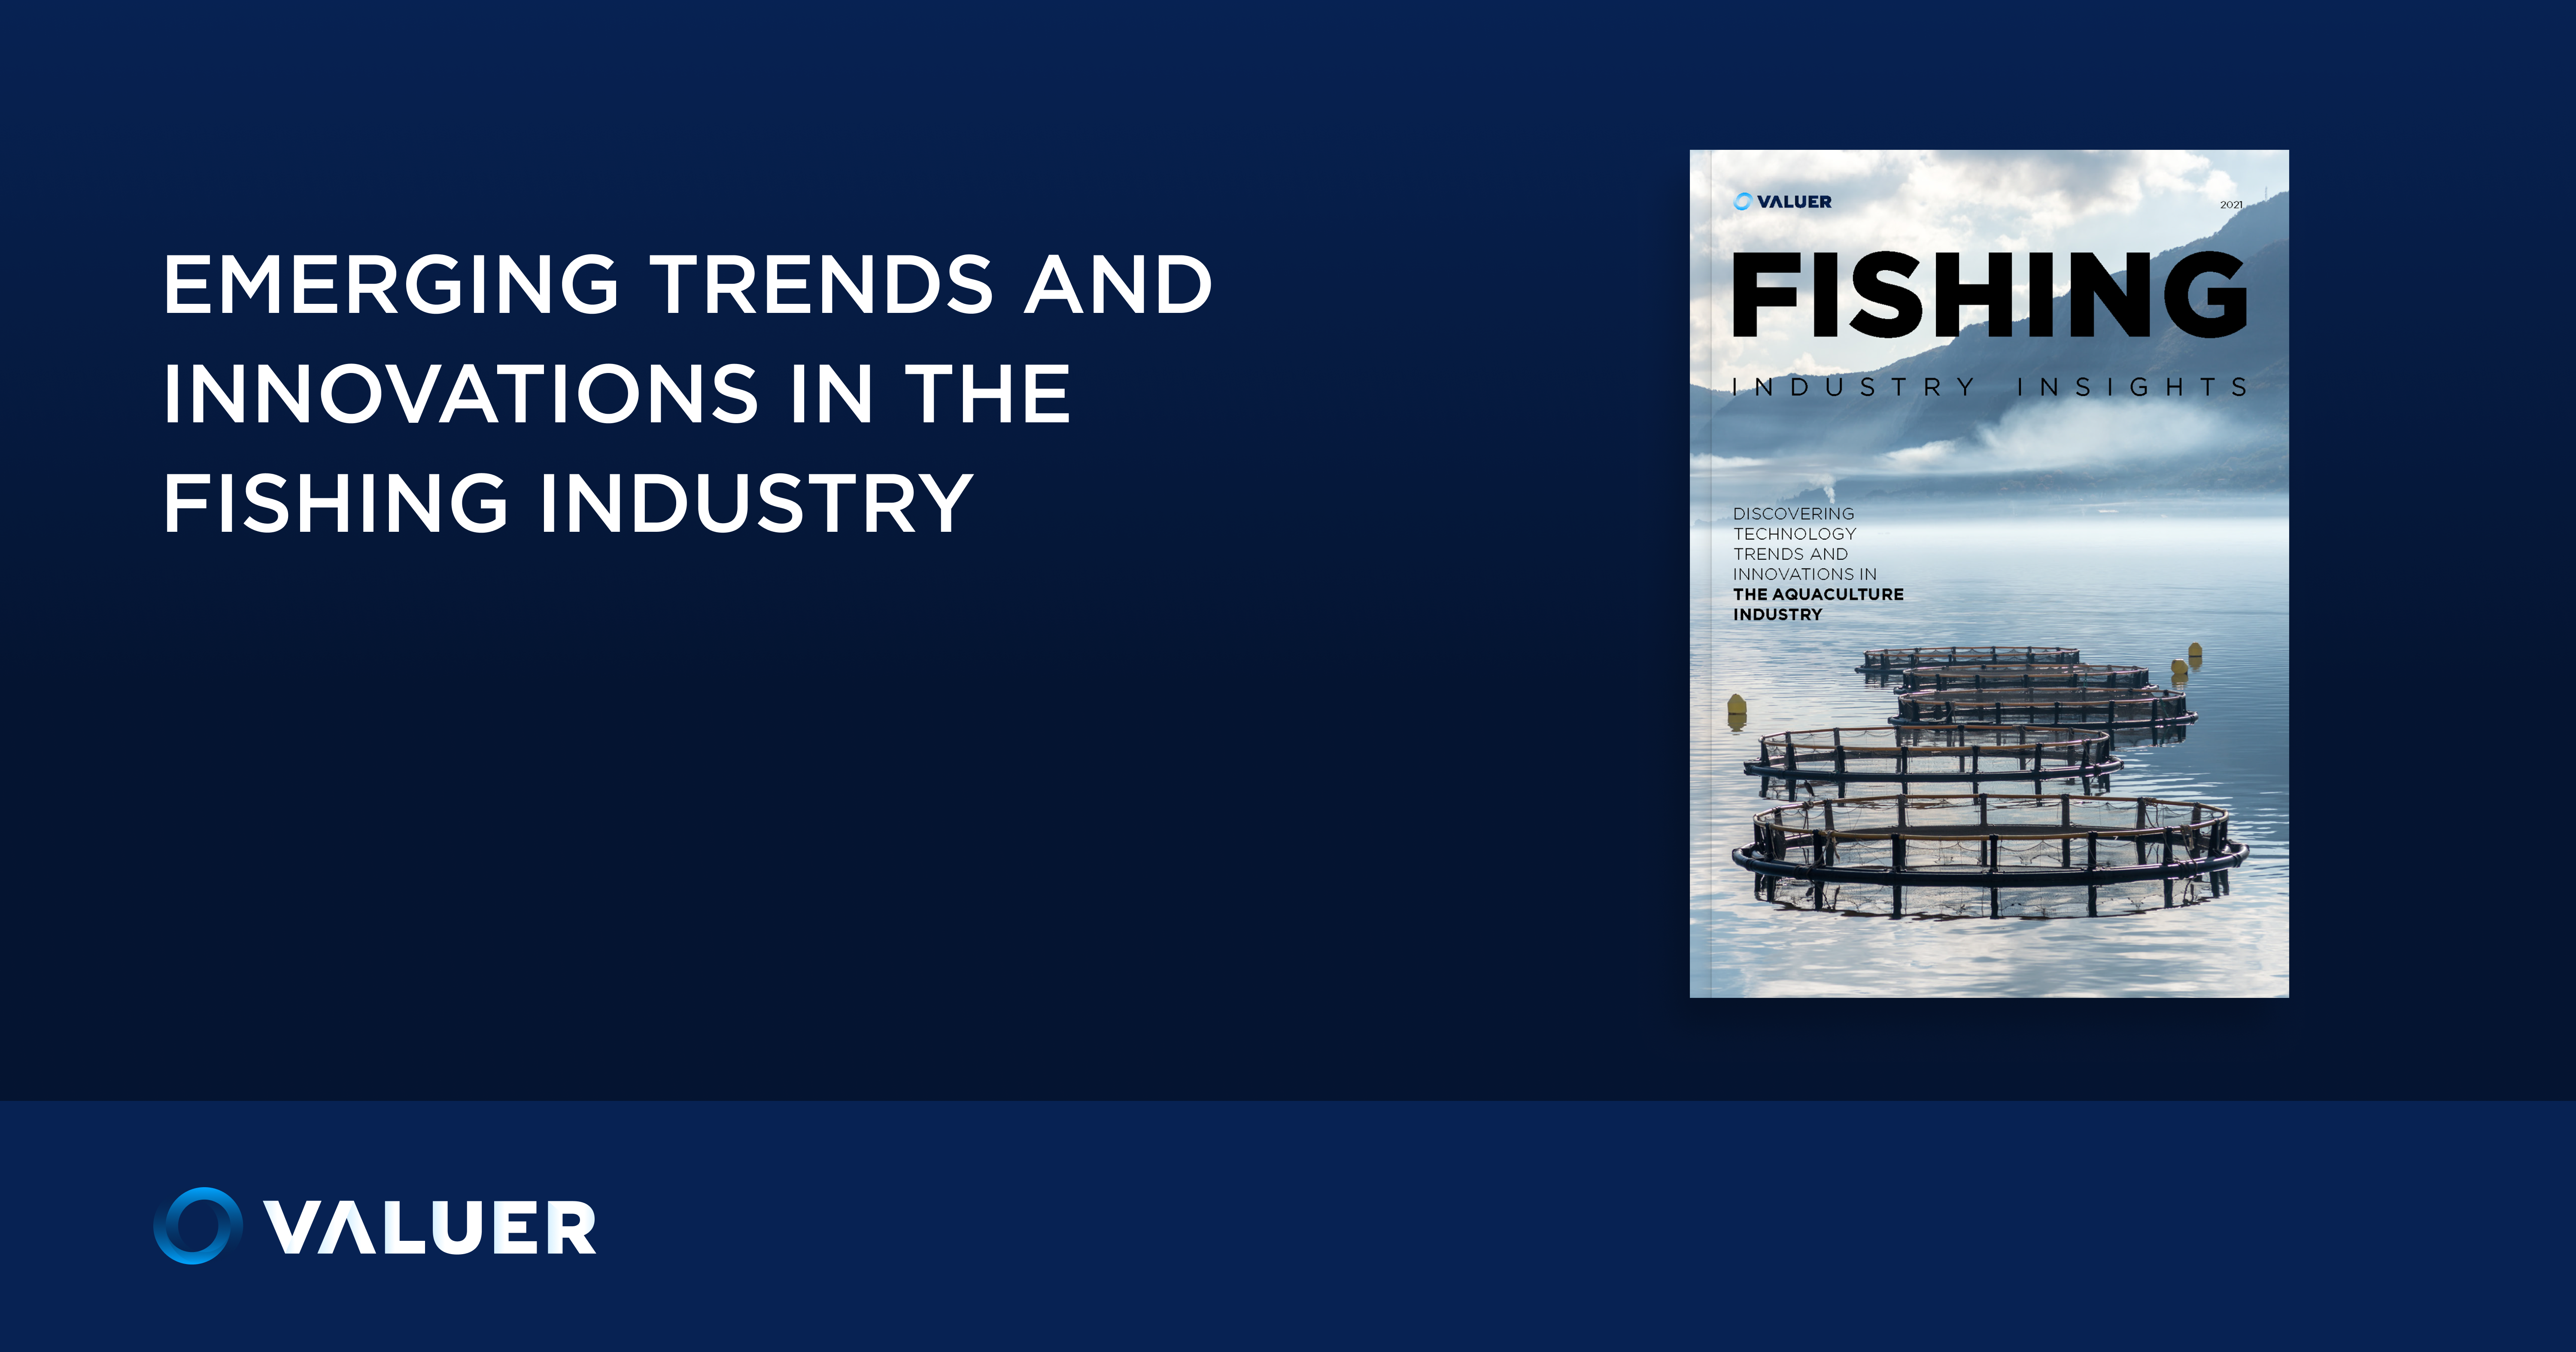 Fishing Industry Insights